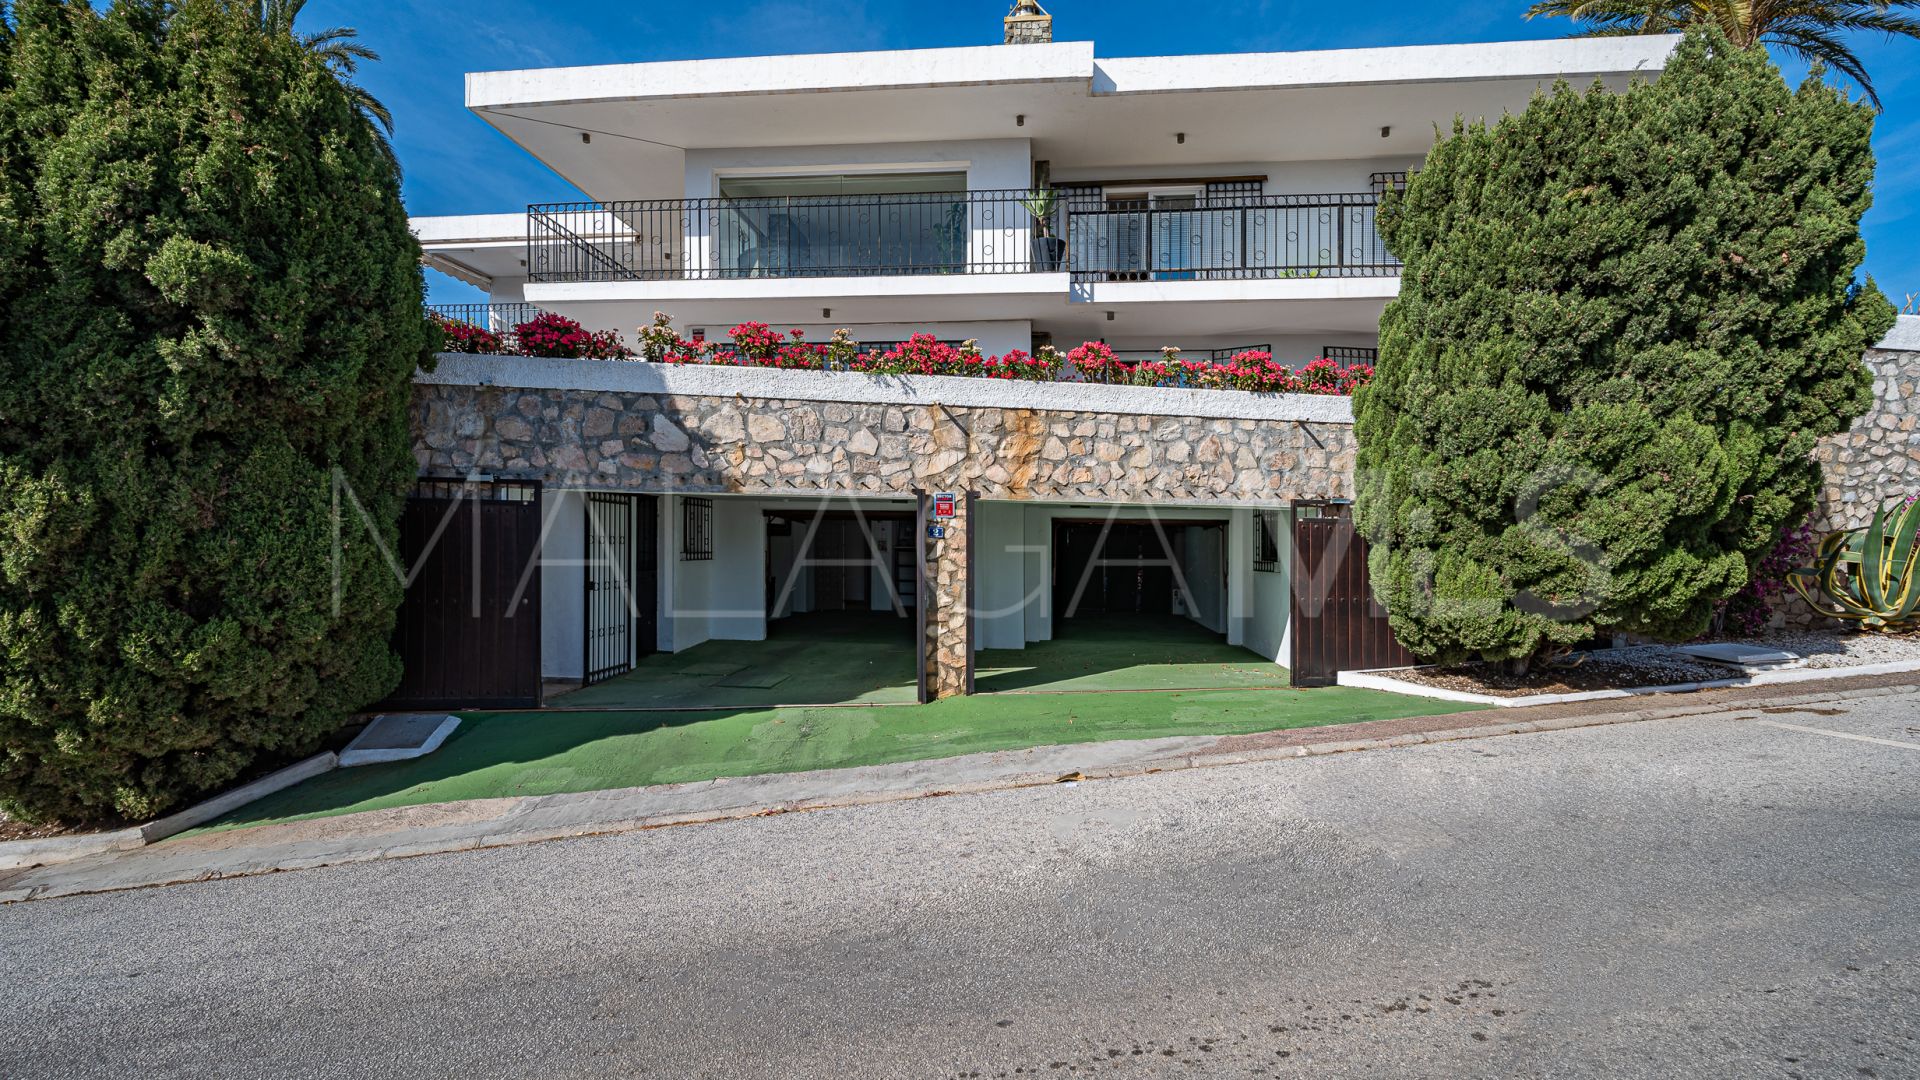 Hus i byn for sale in Nueva Andalucia